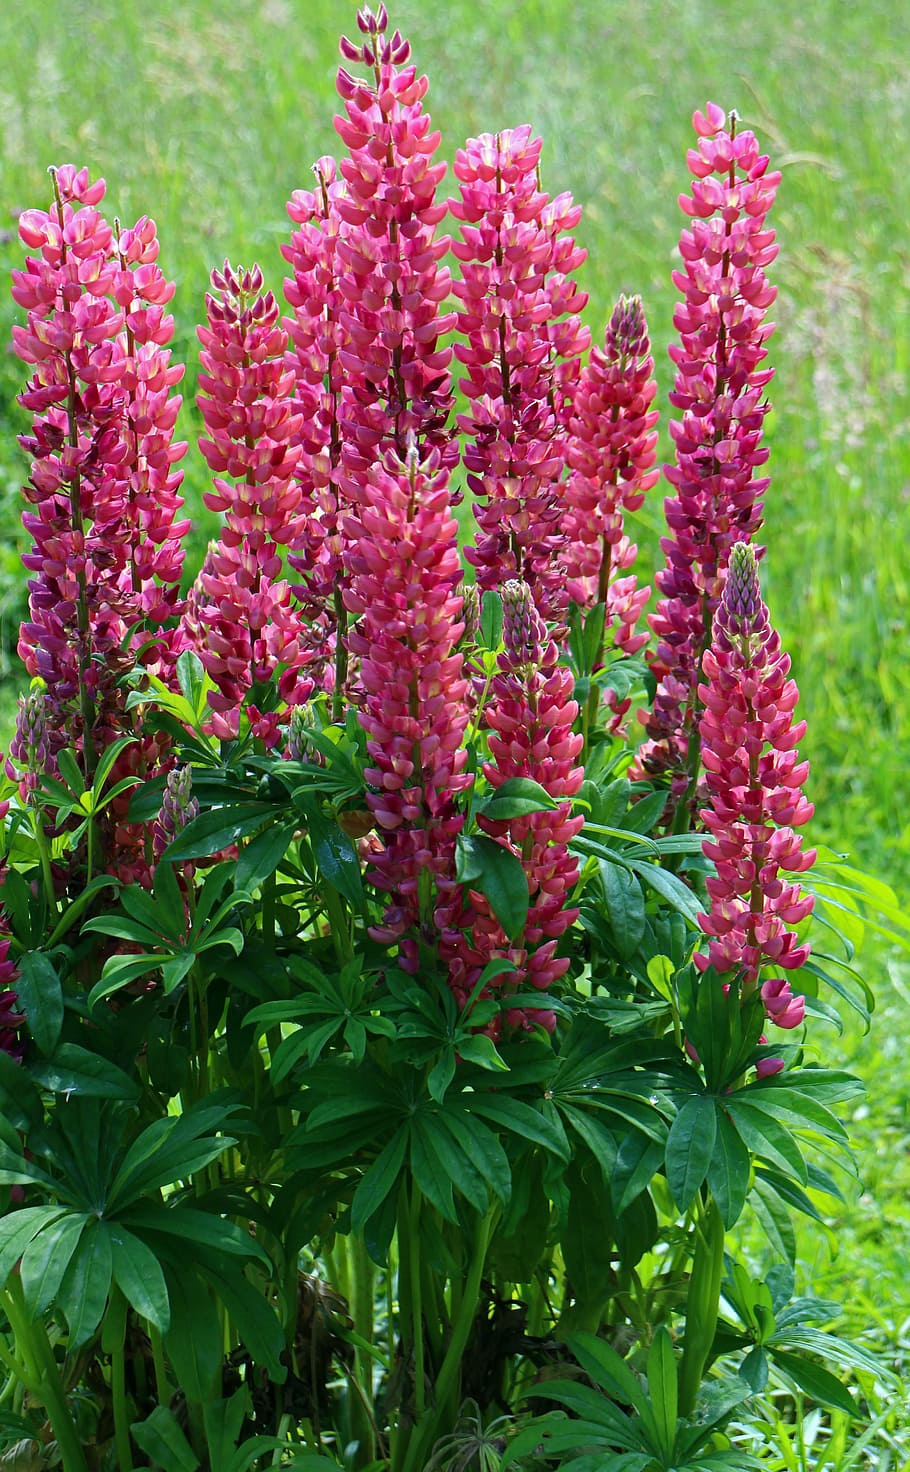 lupine, lupins, flowers, garden flowers, vegetable plant, fodder plant, ornamental plant, wild plant, fabaceae, growth